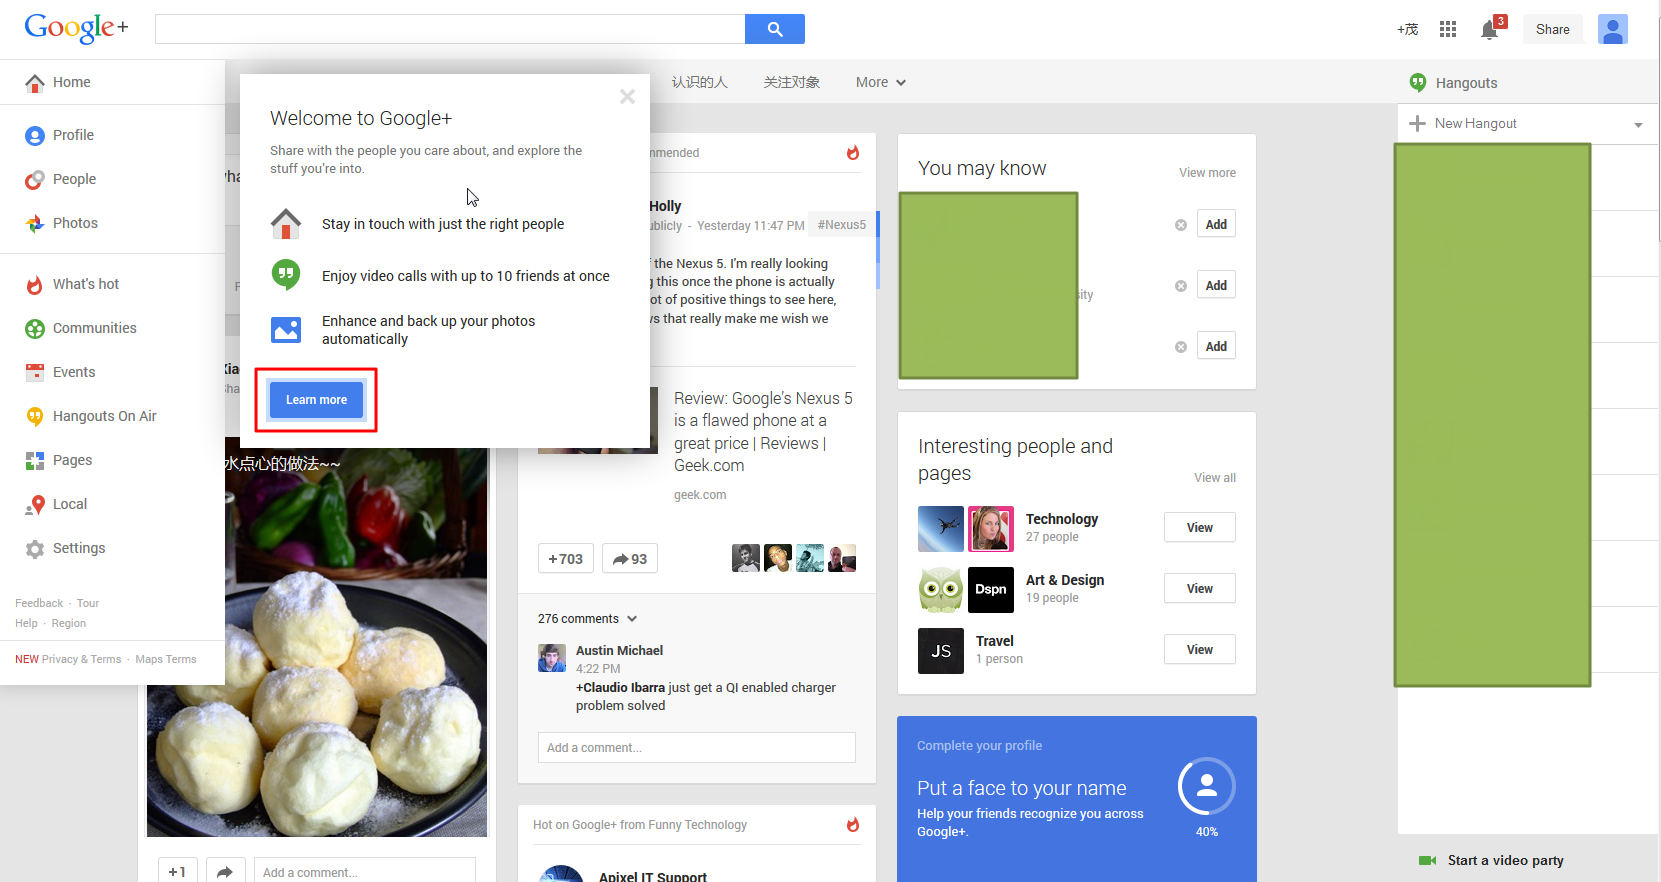 learn more for google plus share with the people you care about